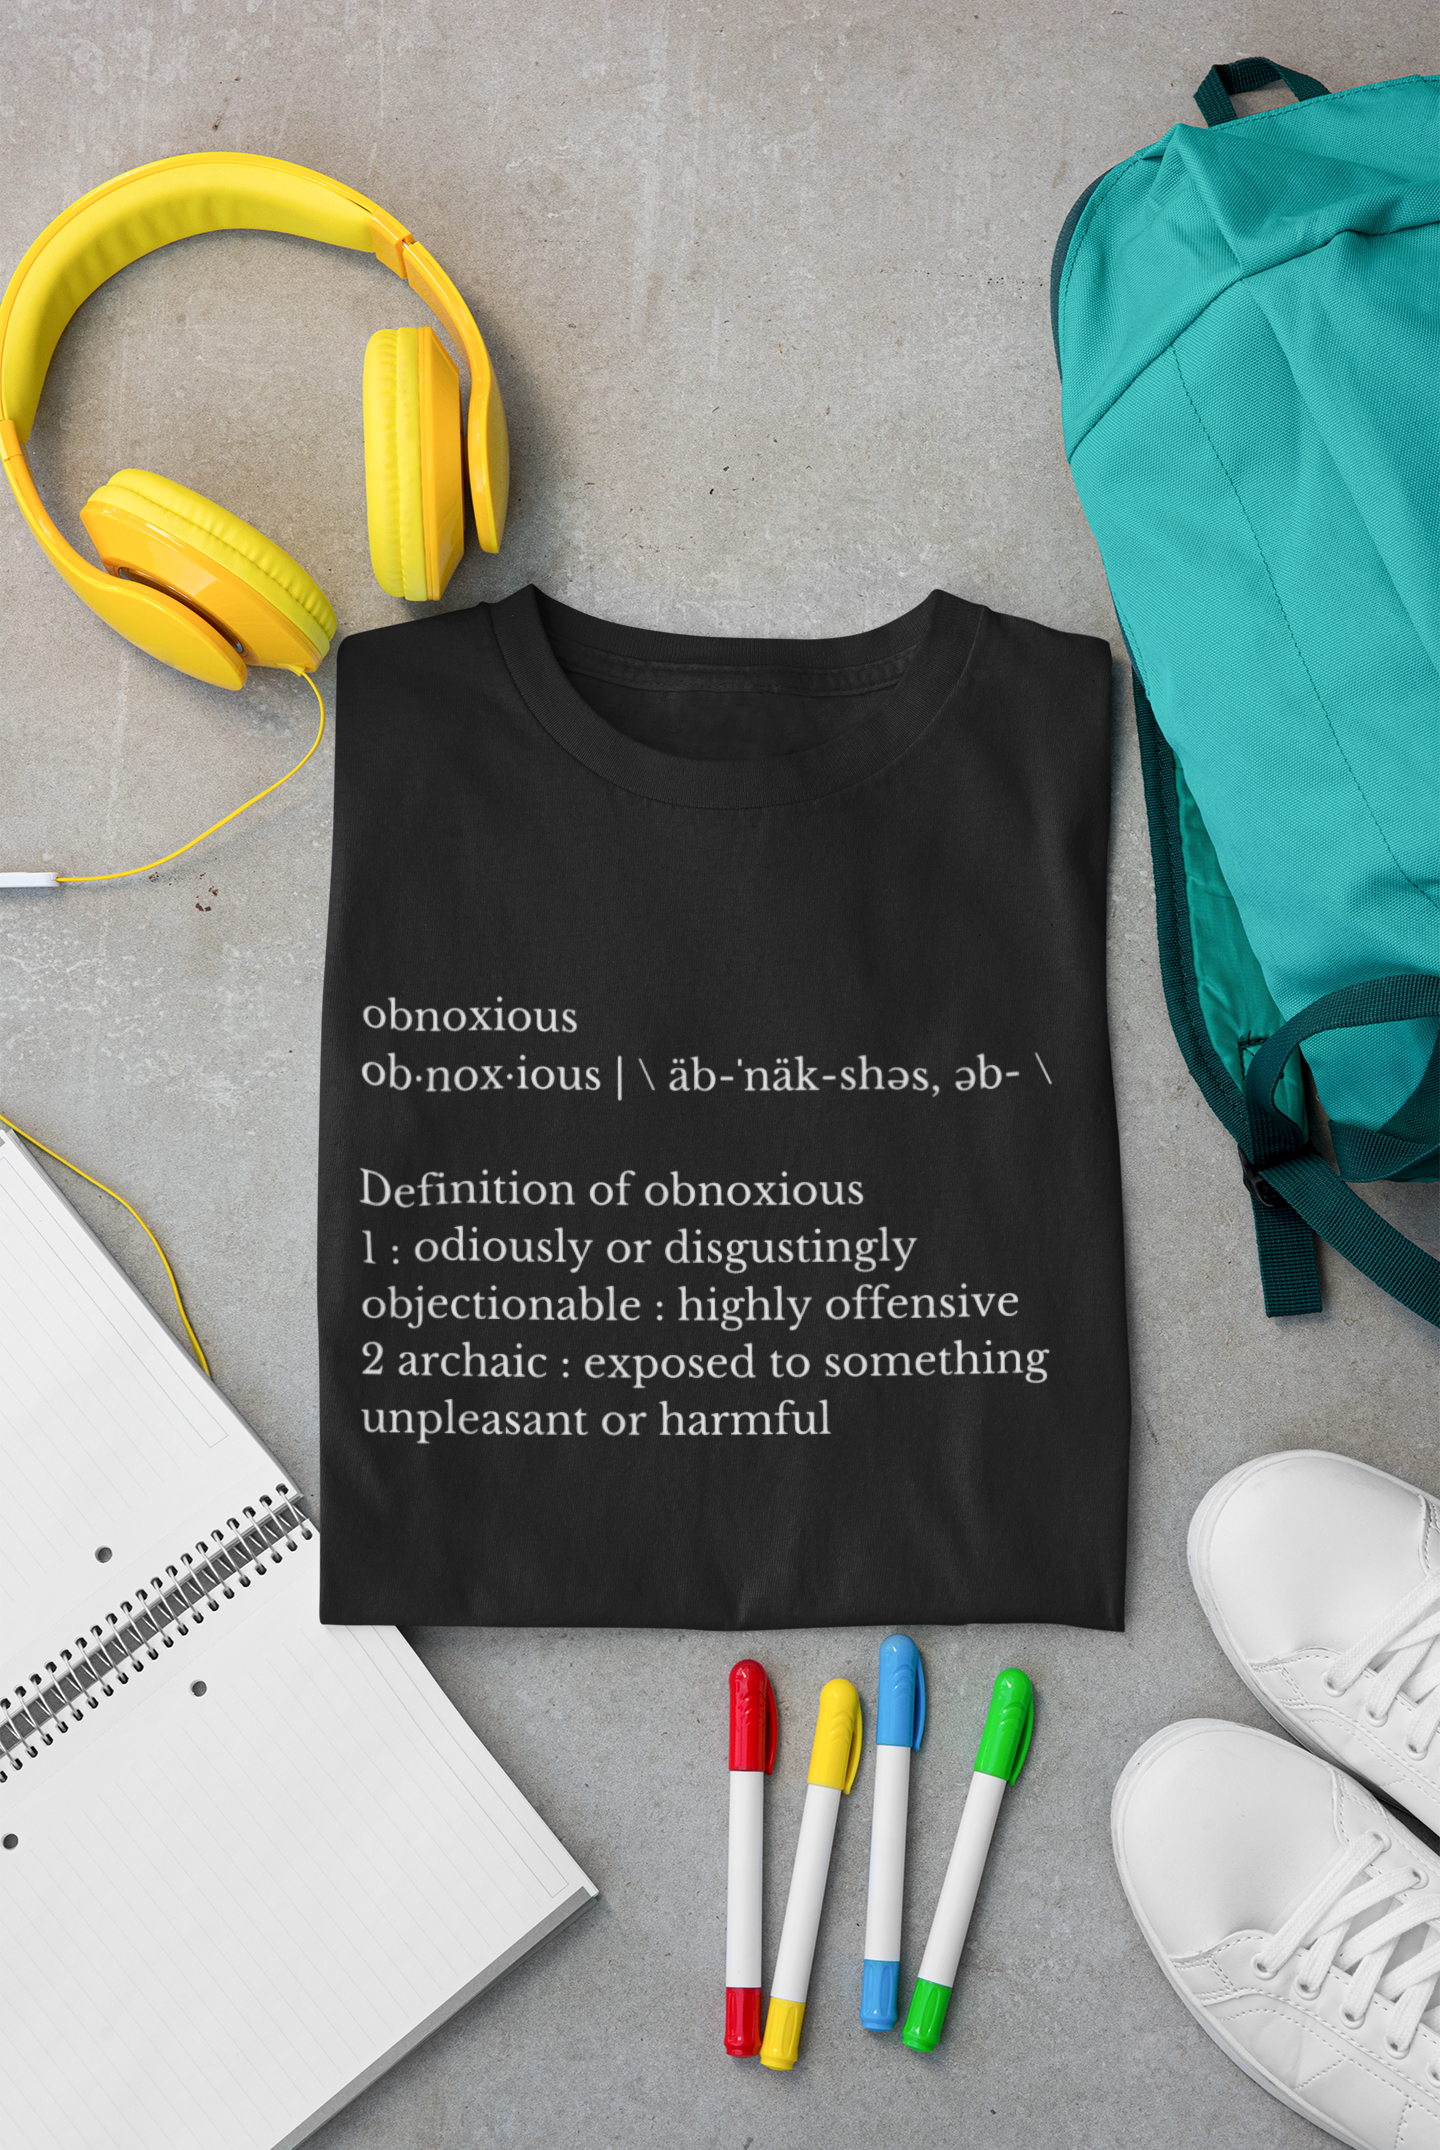 1 Obnoxious Definition Shirt - Obnoxious Apparel - Funny Offensive Shirts for Women